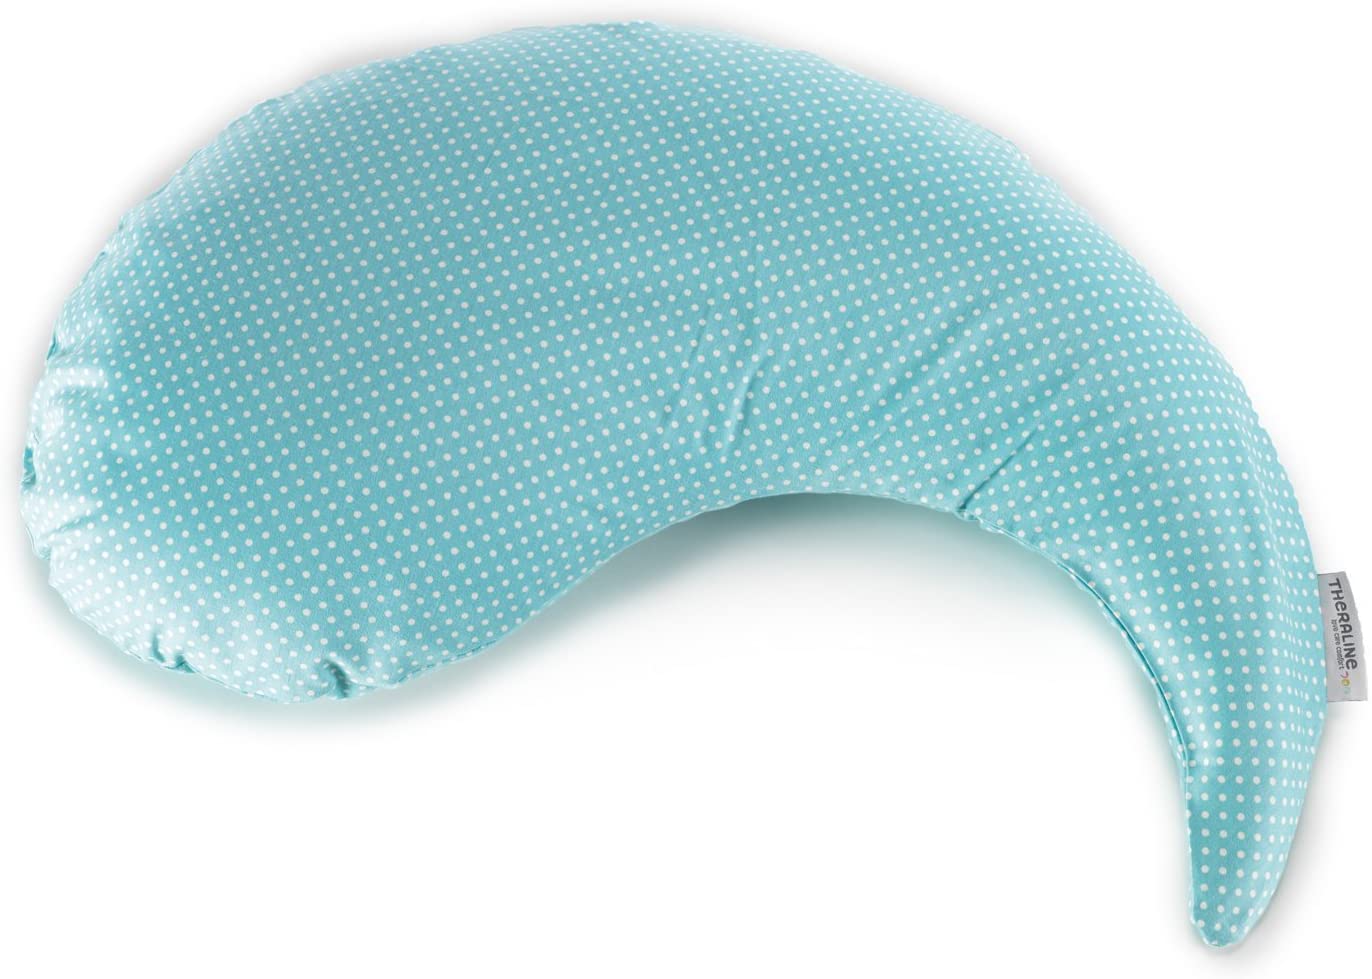 Theraline Yinnie Nursing Pillow With Outer Cover Polka Dots Turquoise